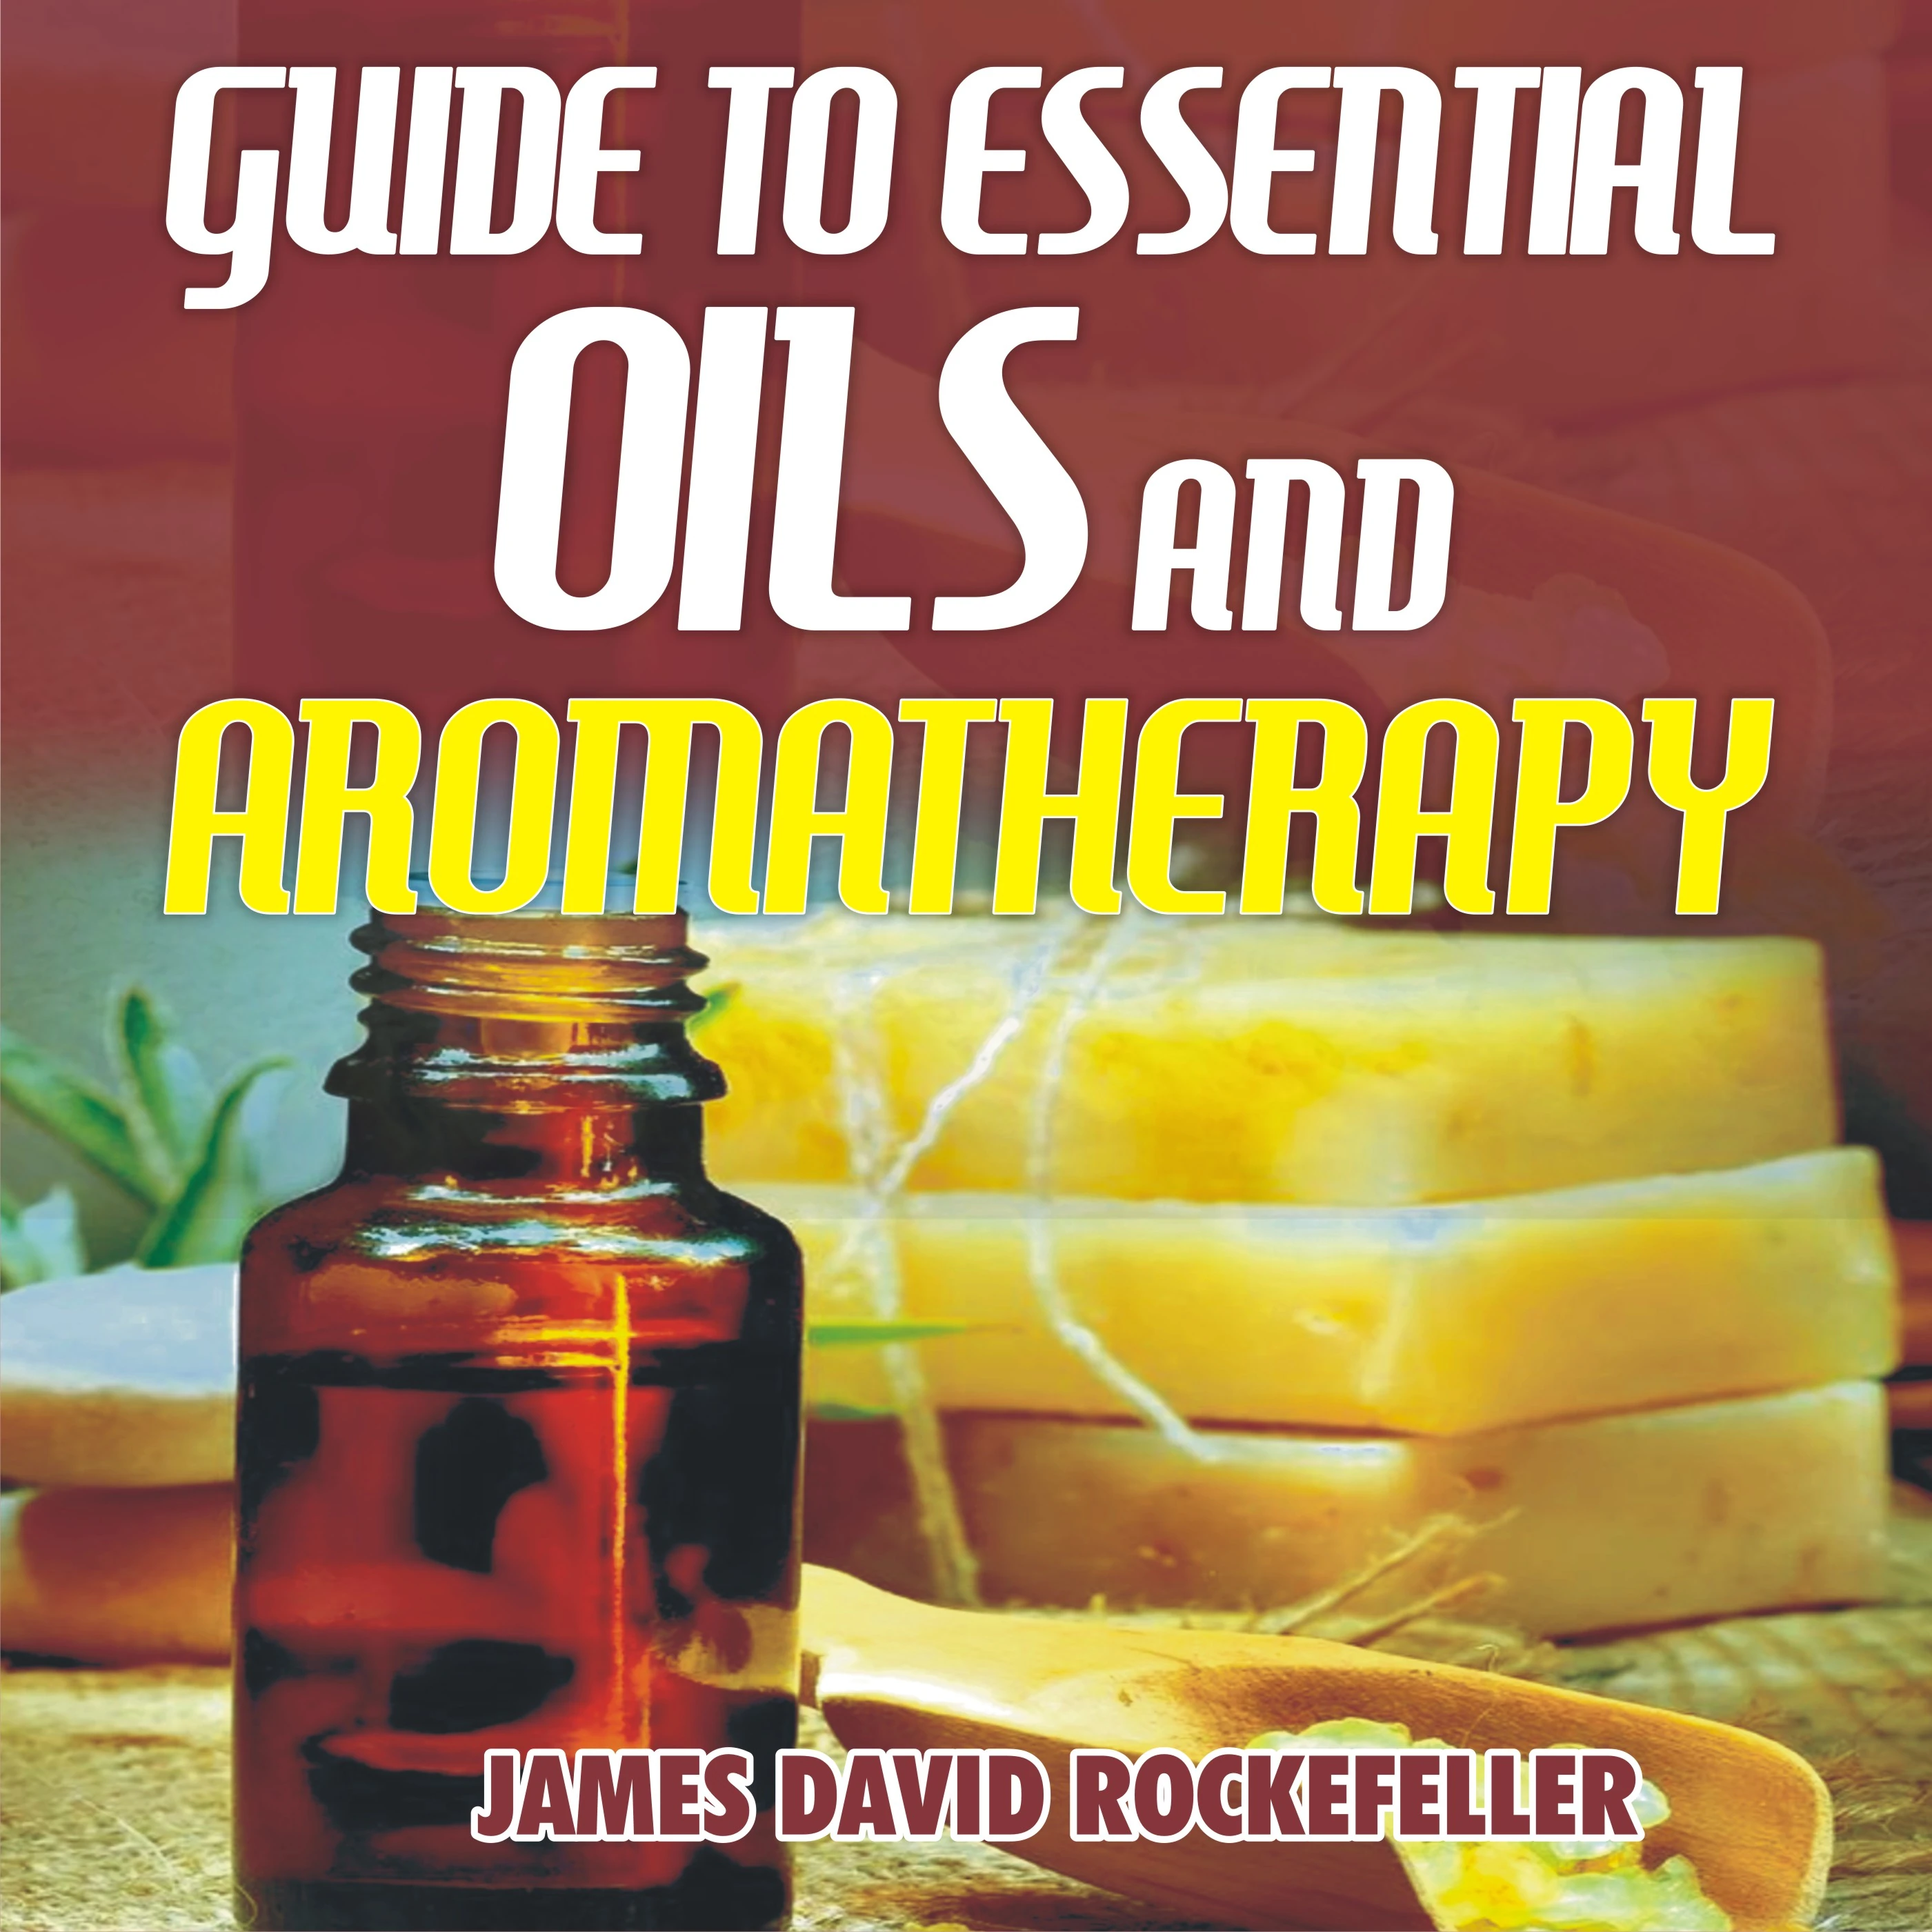 Guide to Essential Oils and Aromatherapy by James David Rockefeller Audiobook